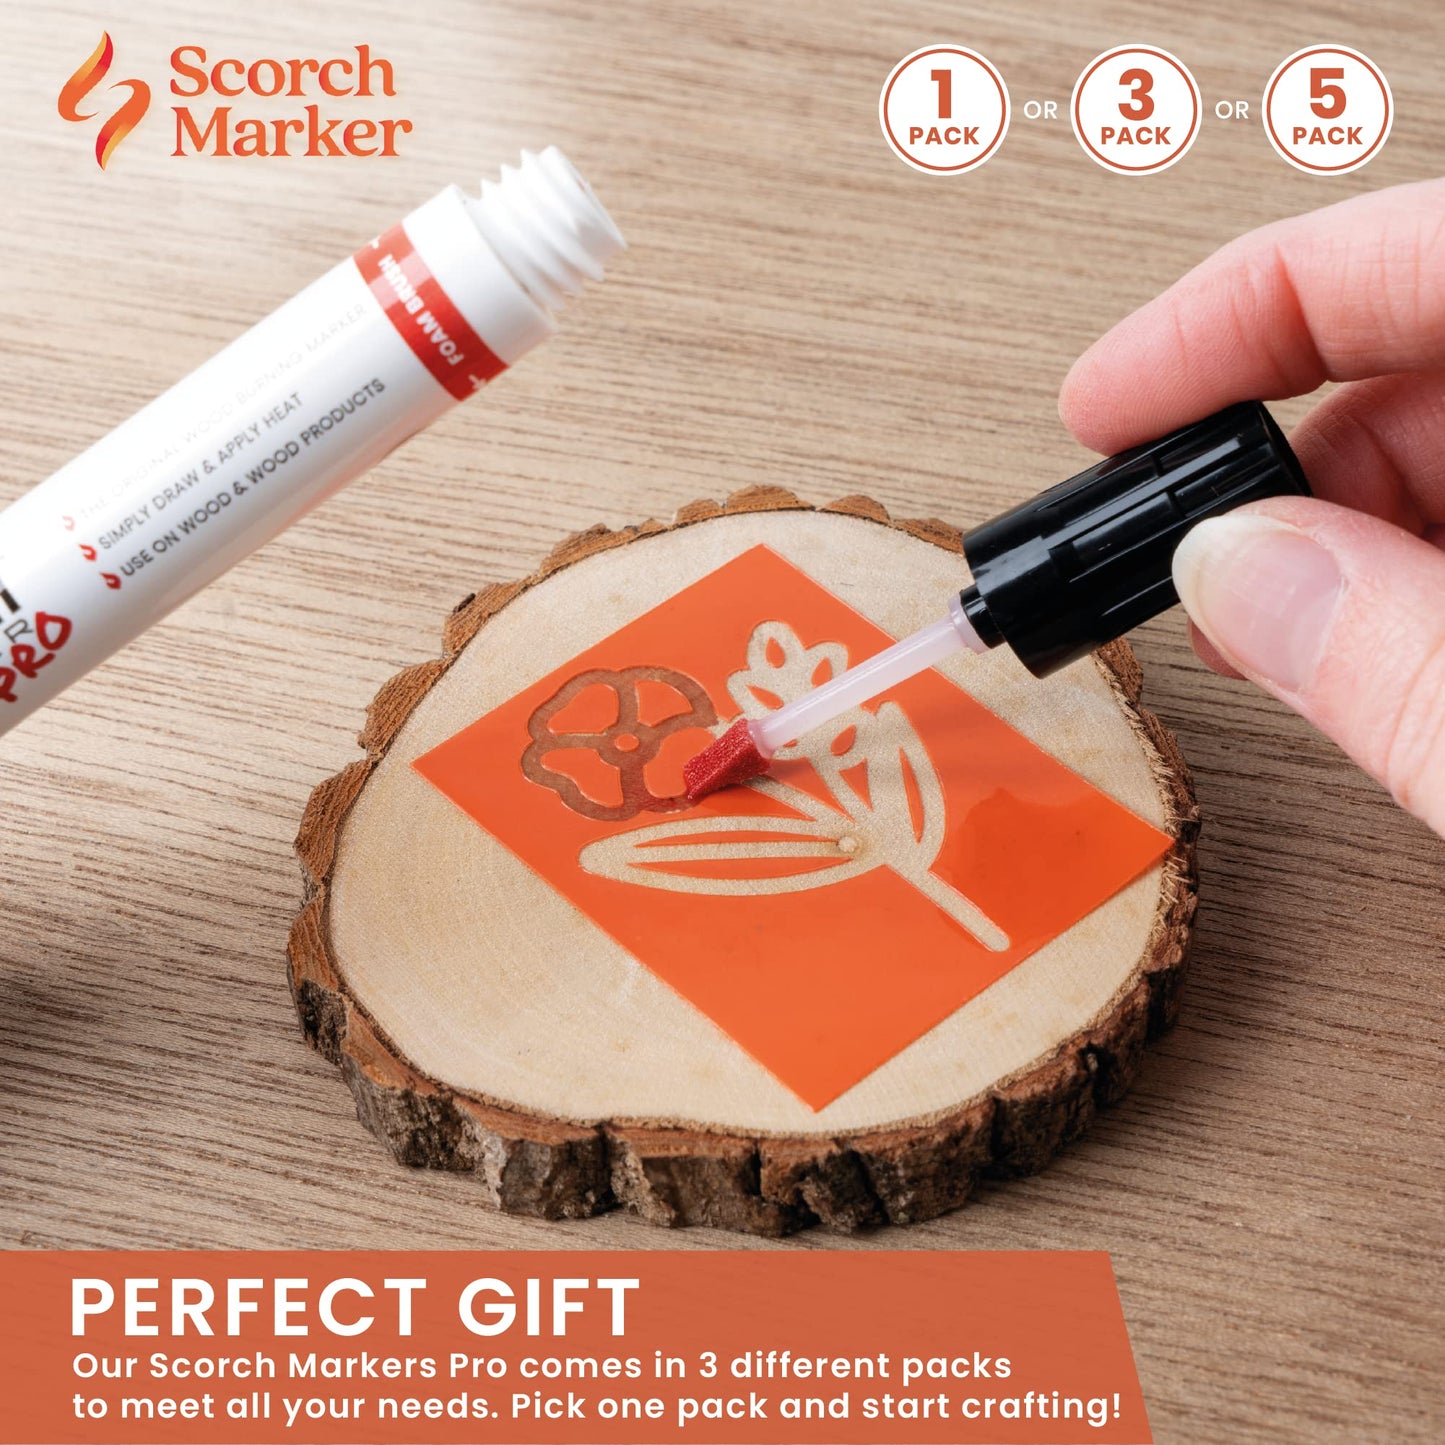 Scorch Marker Woodburning Pen Tool with Foam Tip and Brush, Non-Toxic Marker for Burning Wood, Chemical Wood Burner Set, Do-it-Yourself Kit for Arts